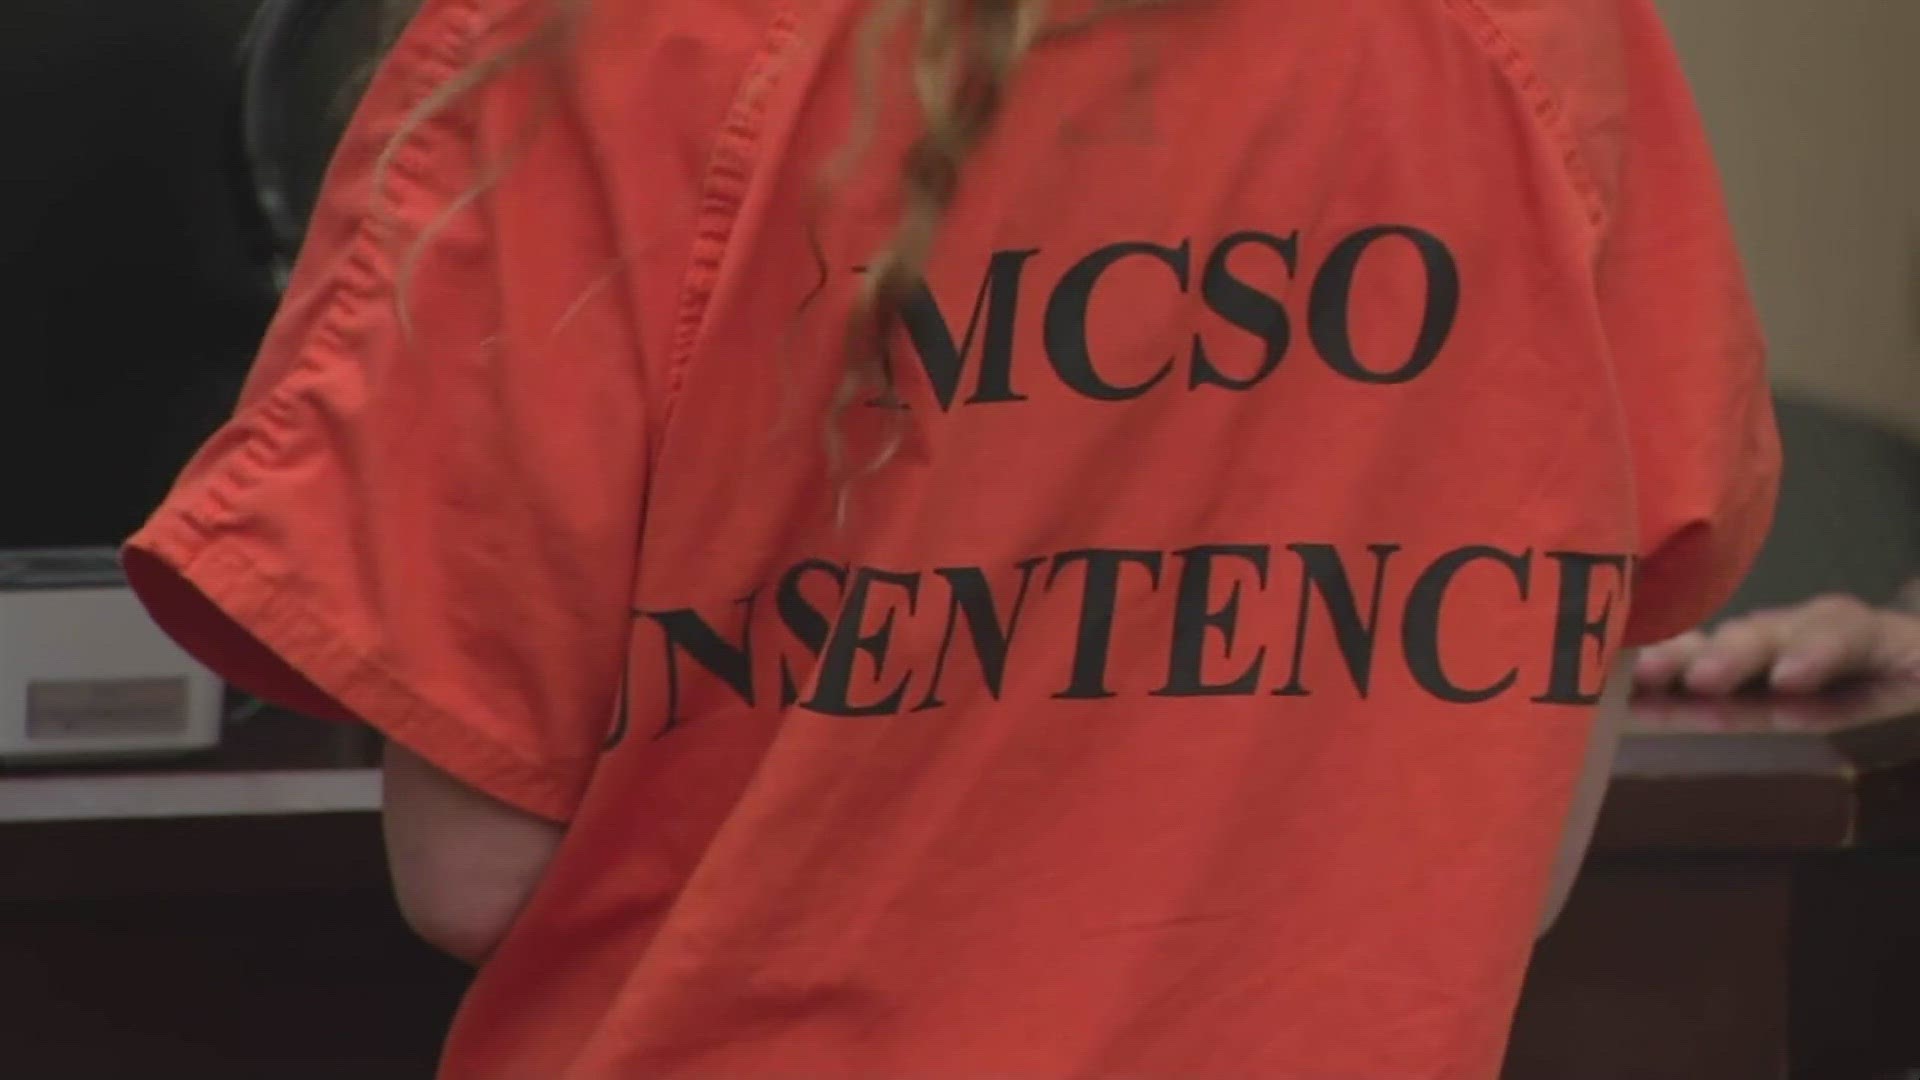 The 'Doomsday Mom' has already been convicted of killing her children in Idaho.